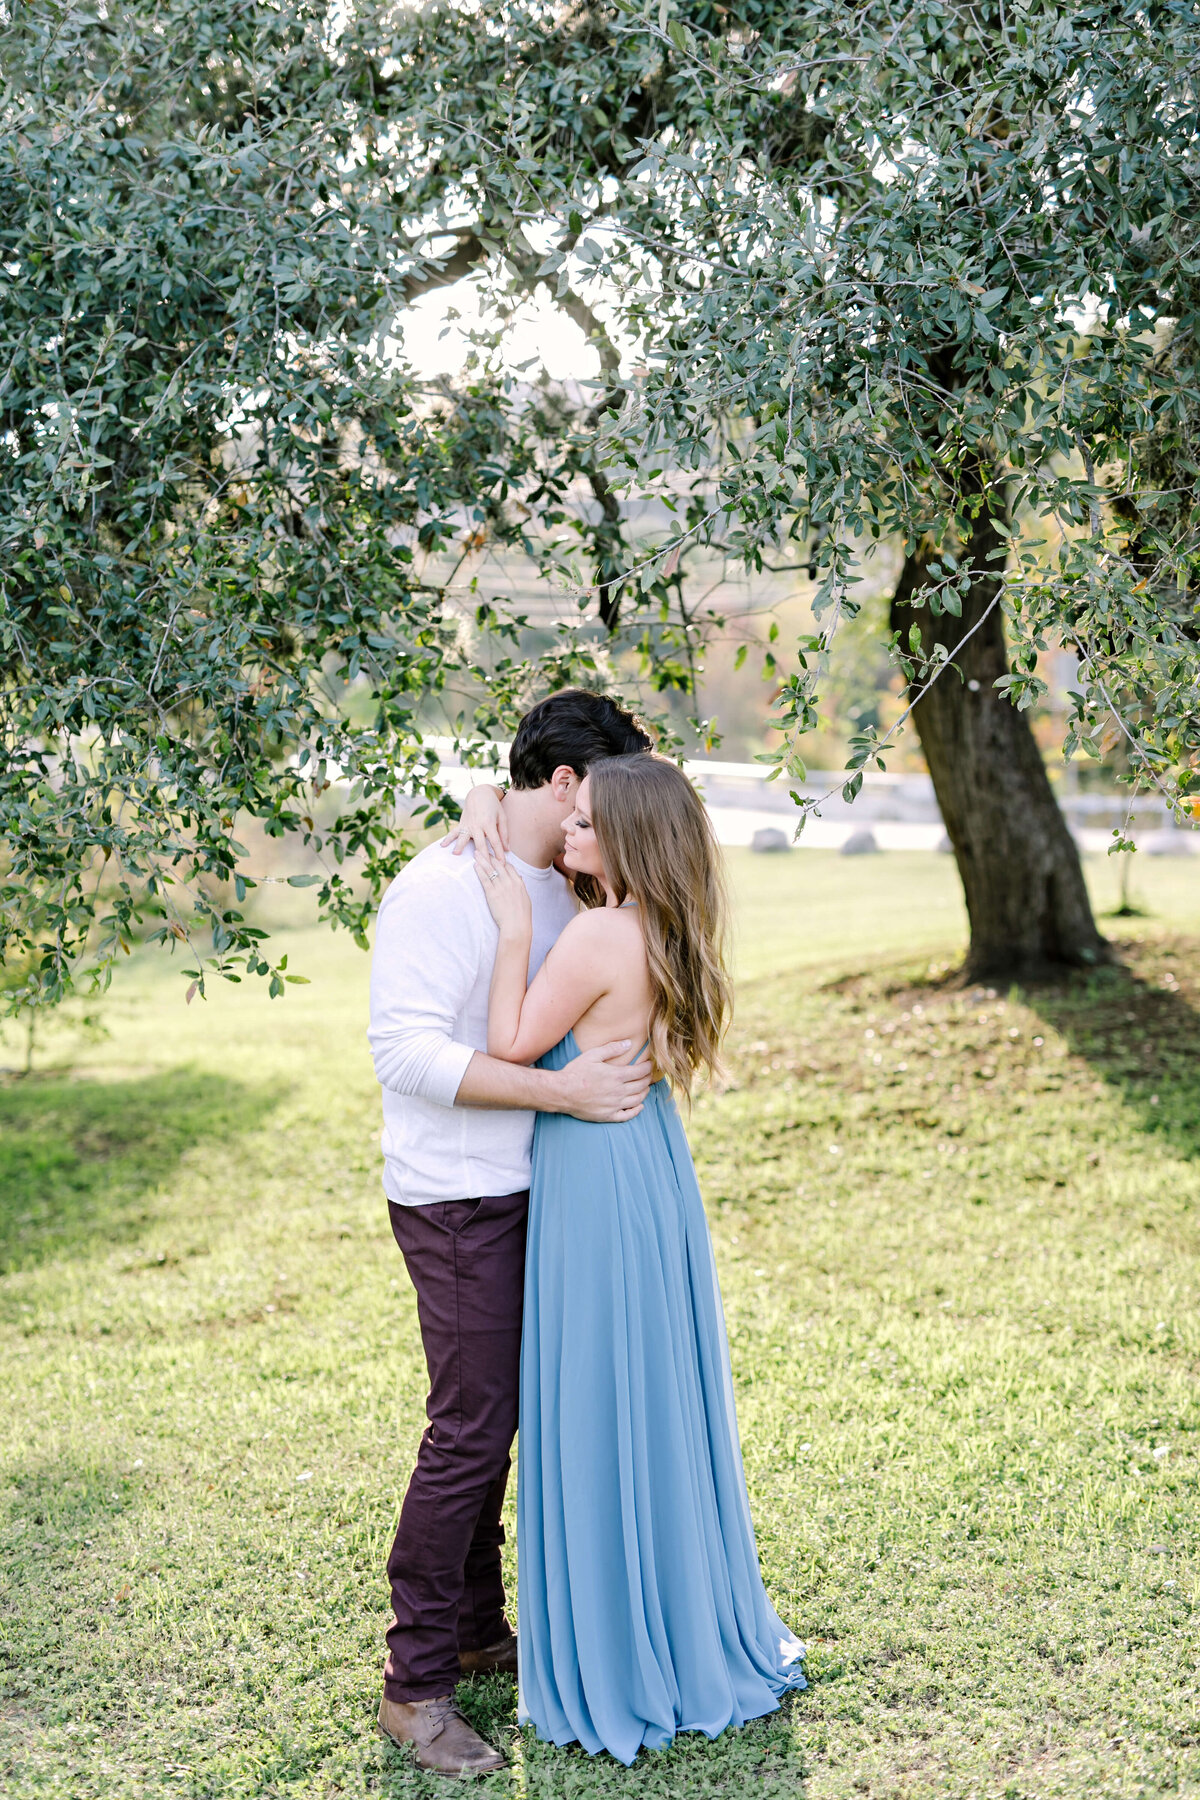 A golden hour engagement session at Bull Creek Park